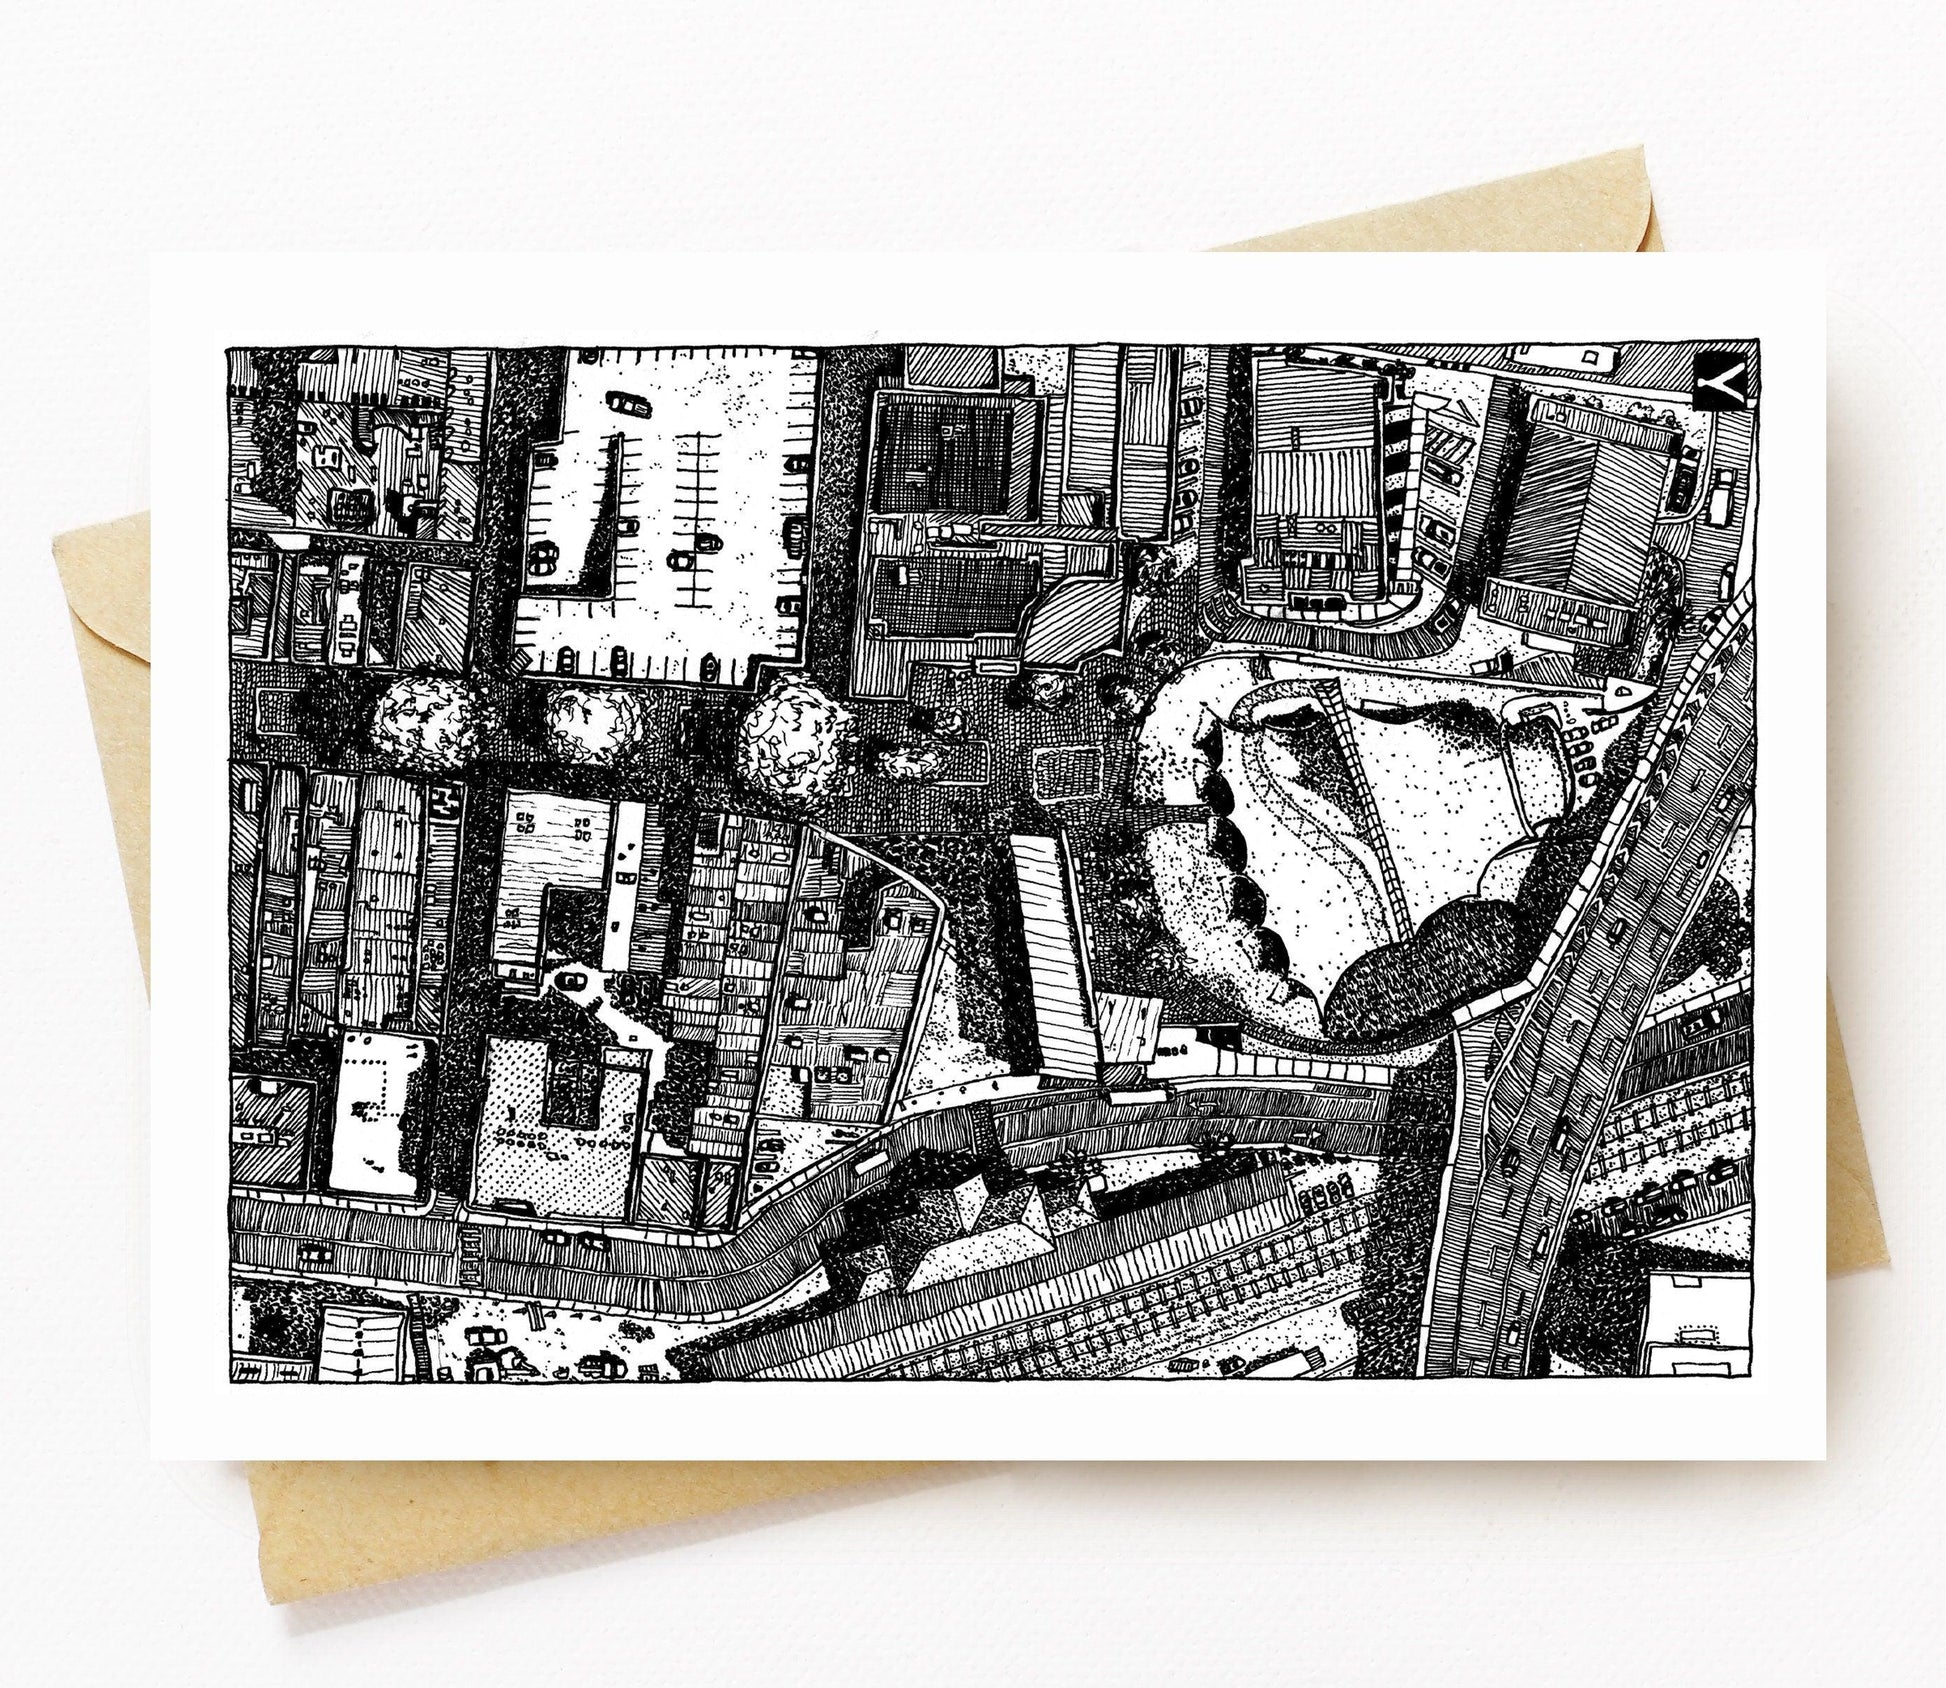 BellavanceInk: Greeting Card With A Pen & Ink Drawing Of The Downtown Pedestrian Mall In Charlottesville  5 x 7 Inches - BellavanceInk